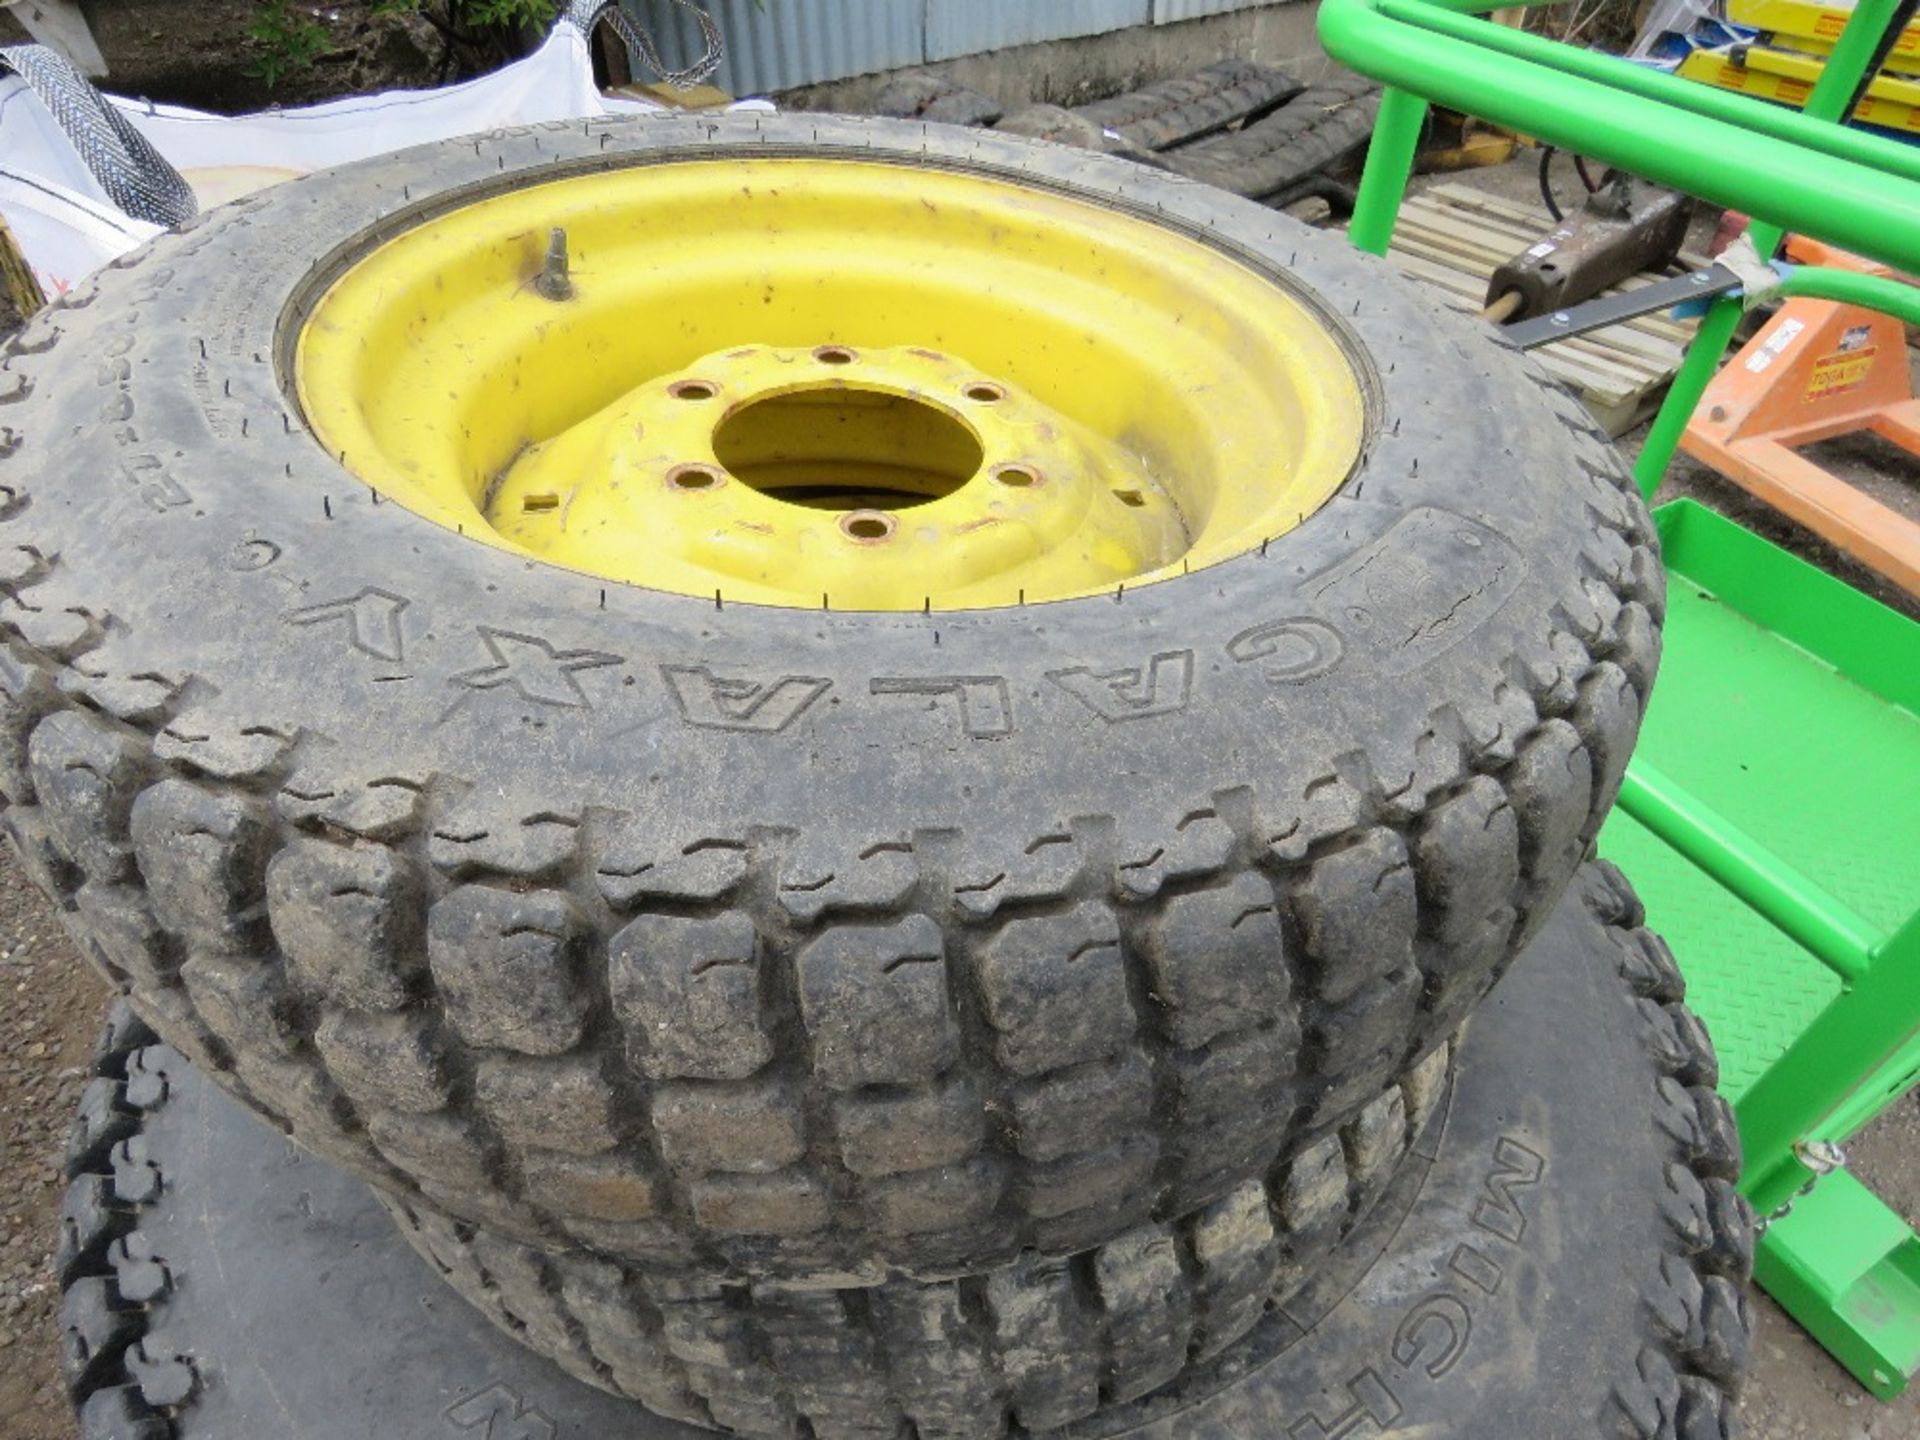 SET OF GRASSLAND WHEELS AND TYRES, BELIVED FROM JOHN DEERE TRACTOR. 2@41X14.00-20 PLUS 2@ 27X8.50-15 - Image 2 of 5